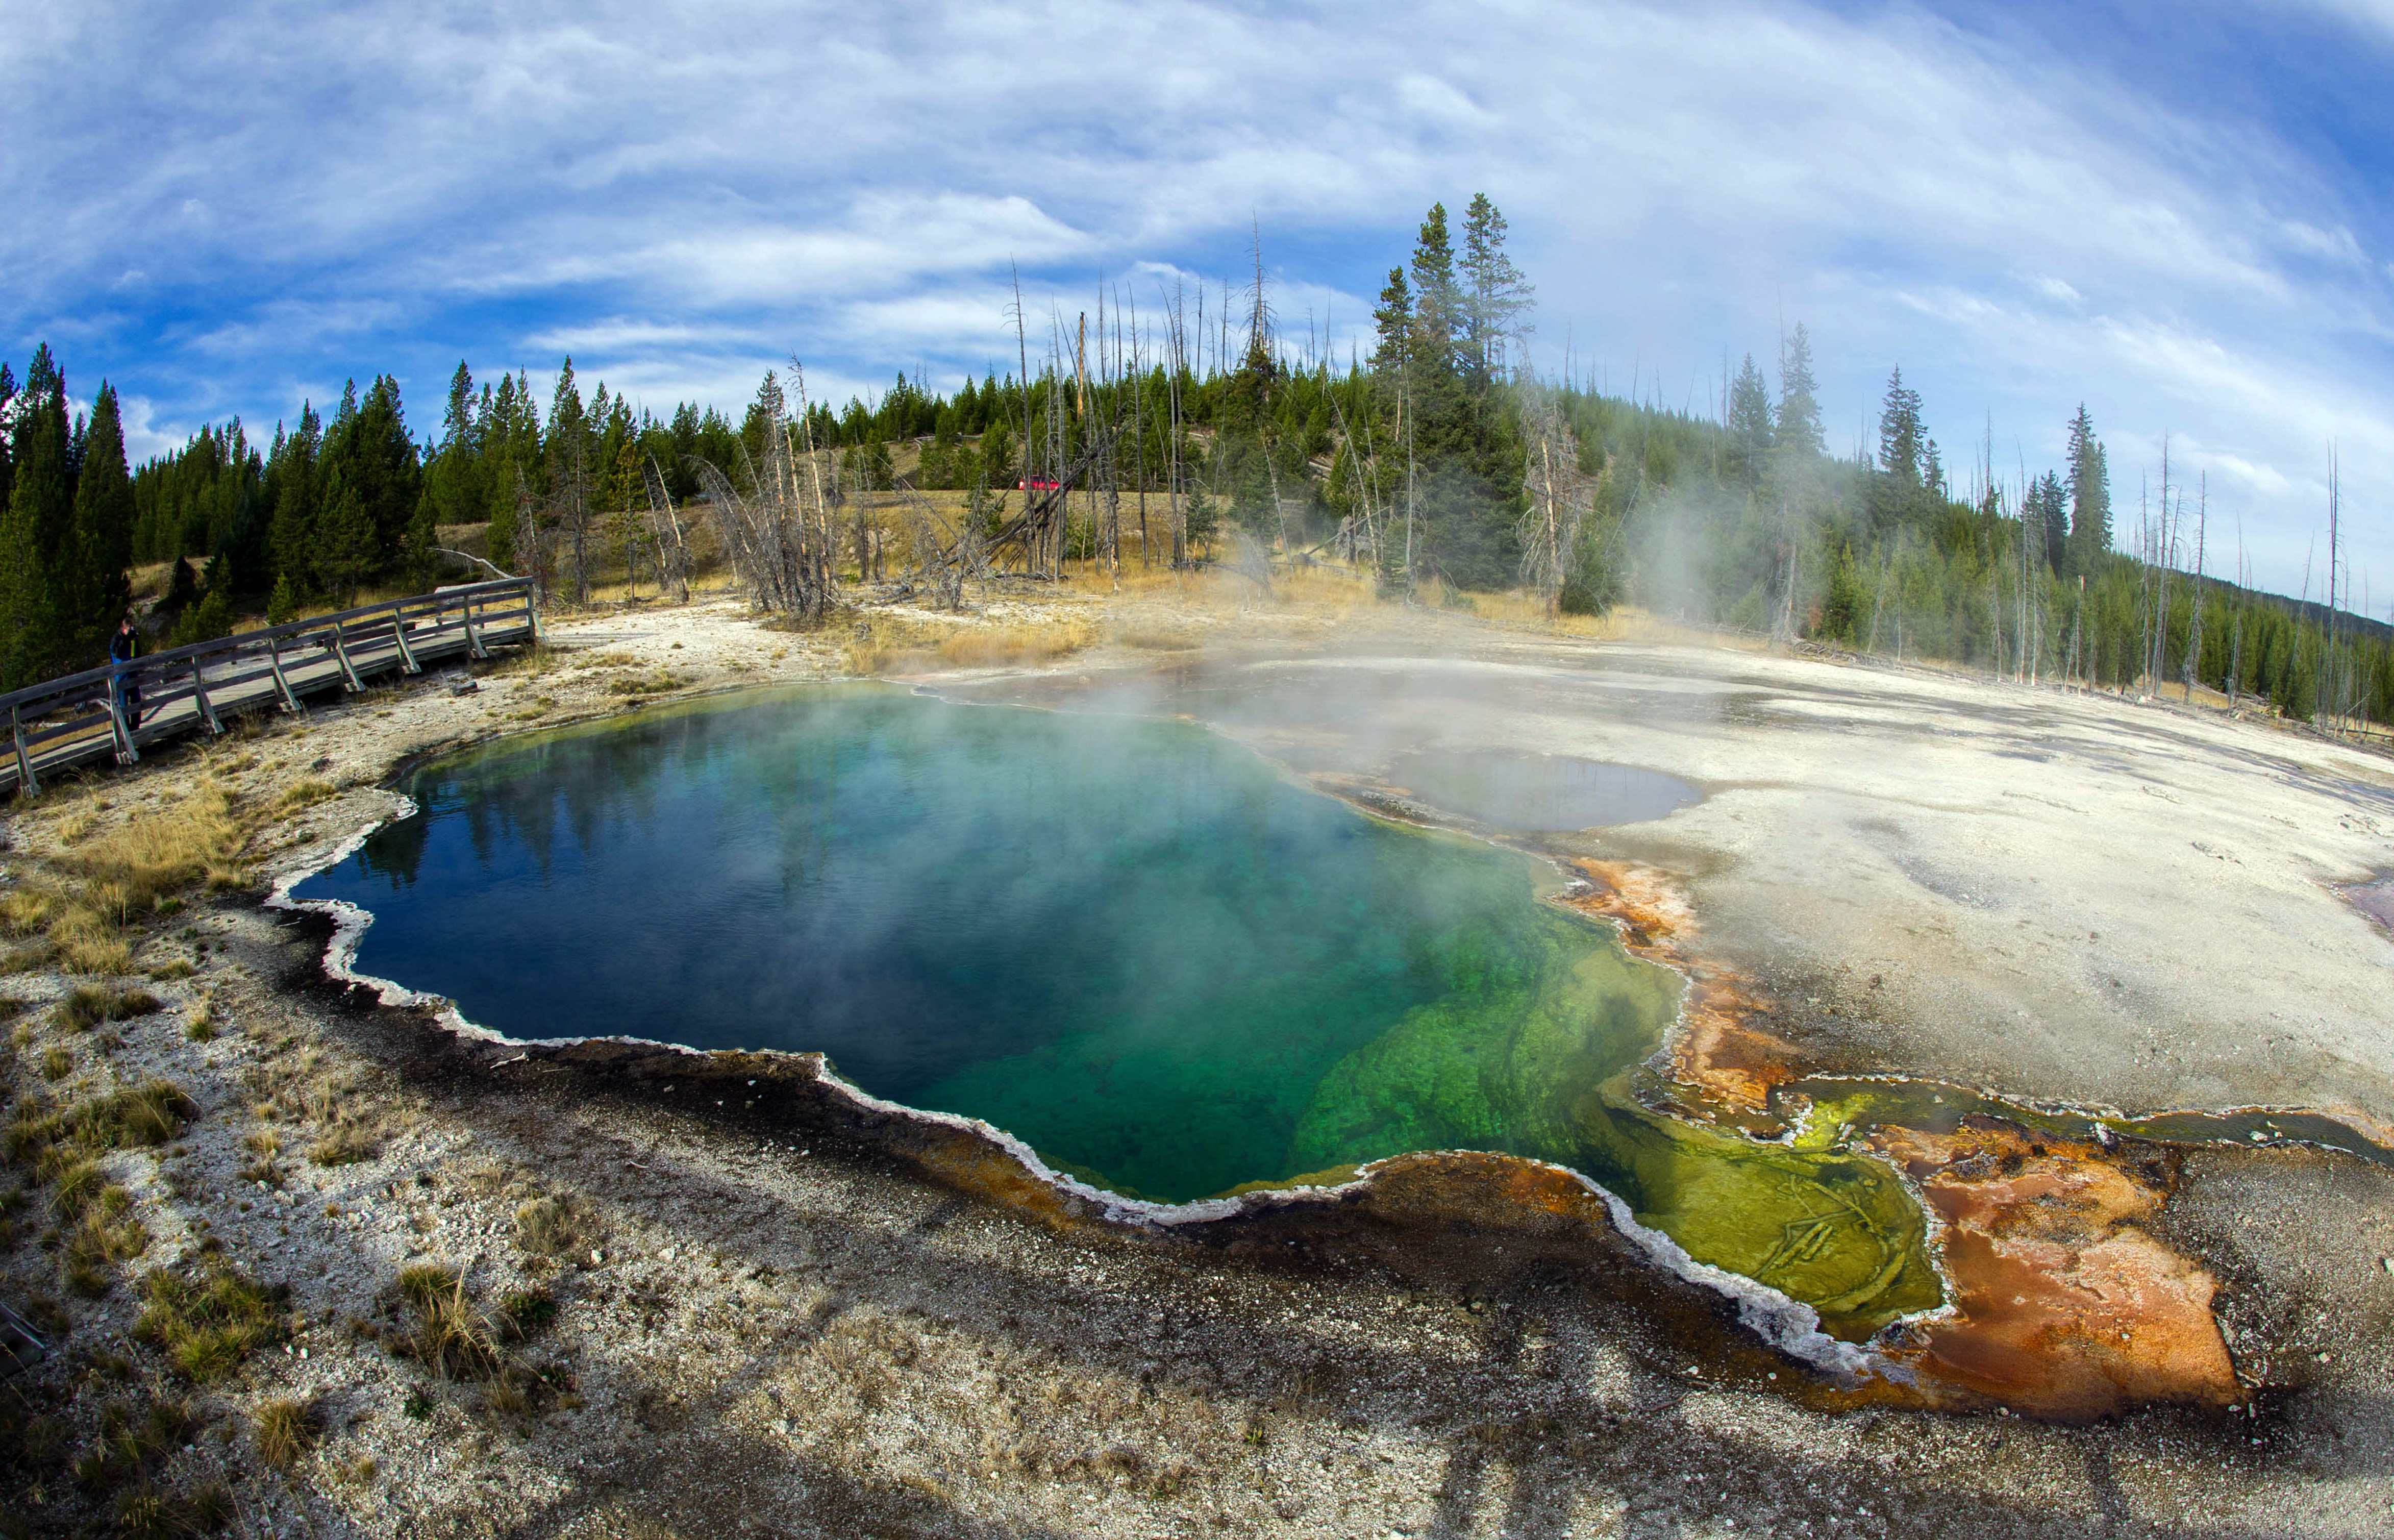 US-PARKS-YELLOWSTONE NATIONAL PARK